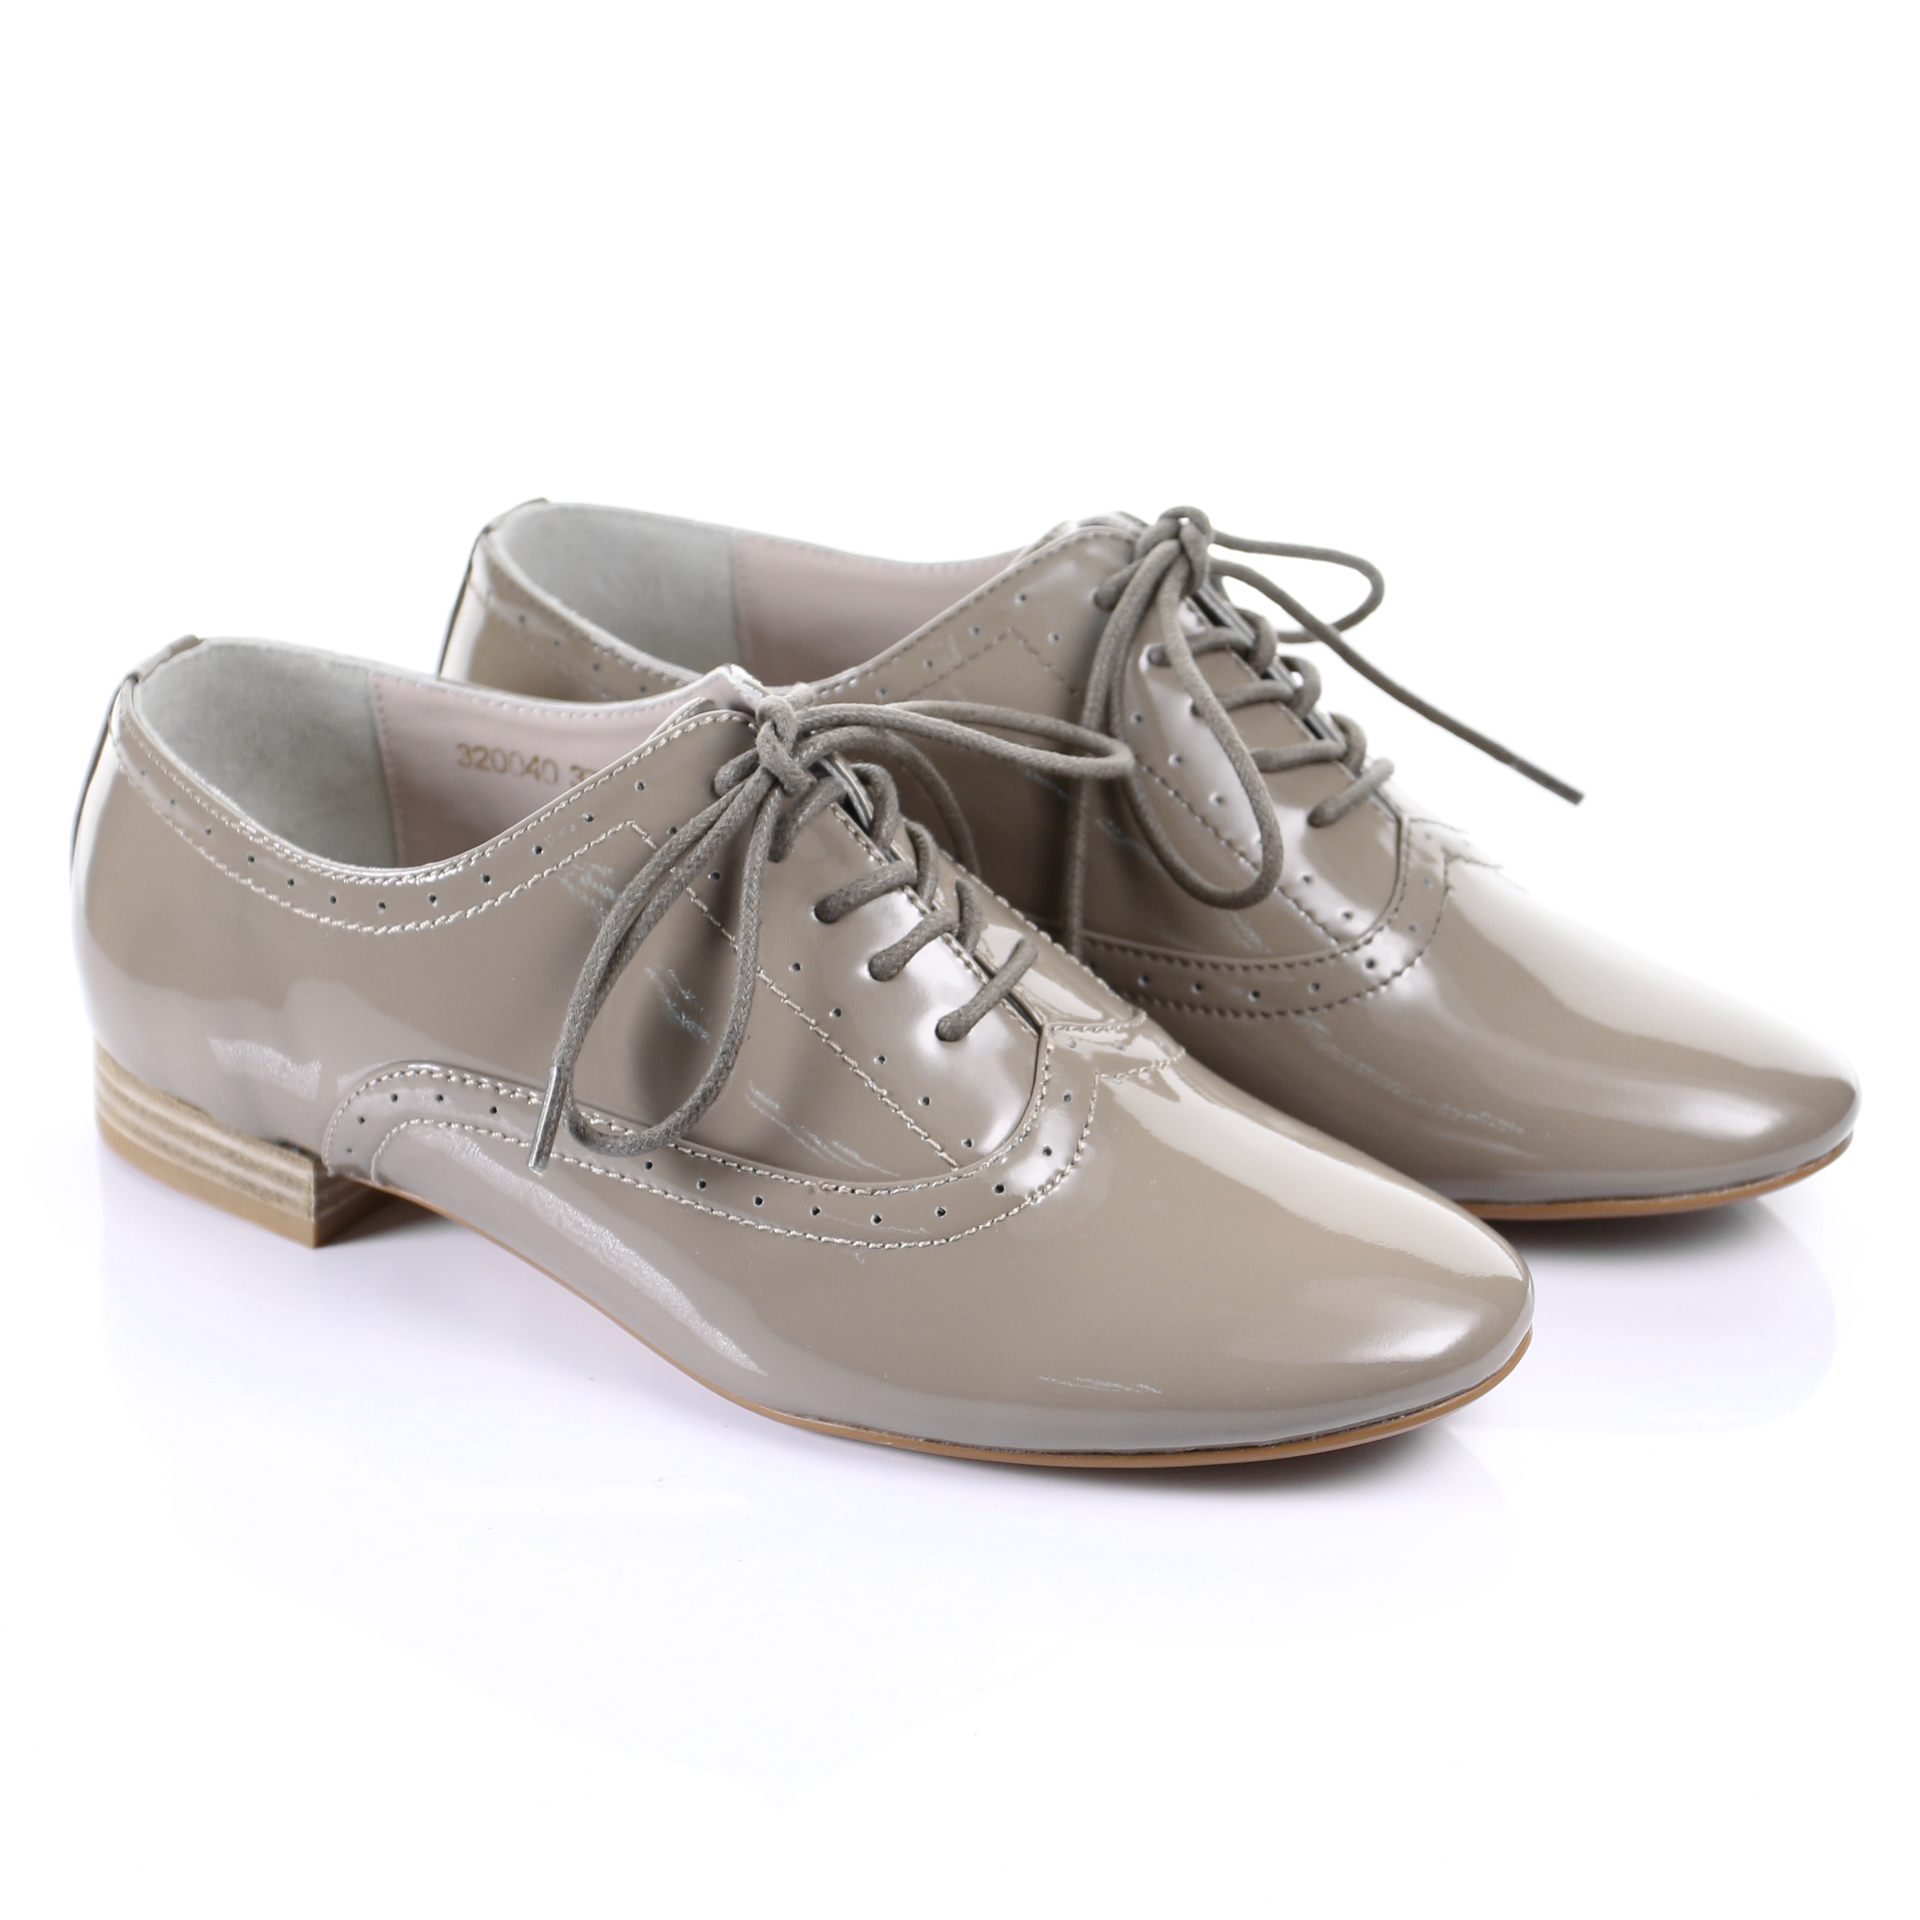  LitLaces - Premium Sheep Skin Synthetic Leather Shoe